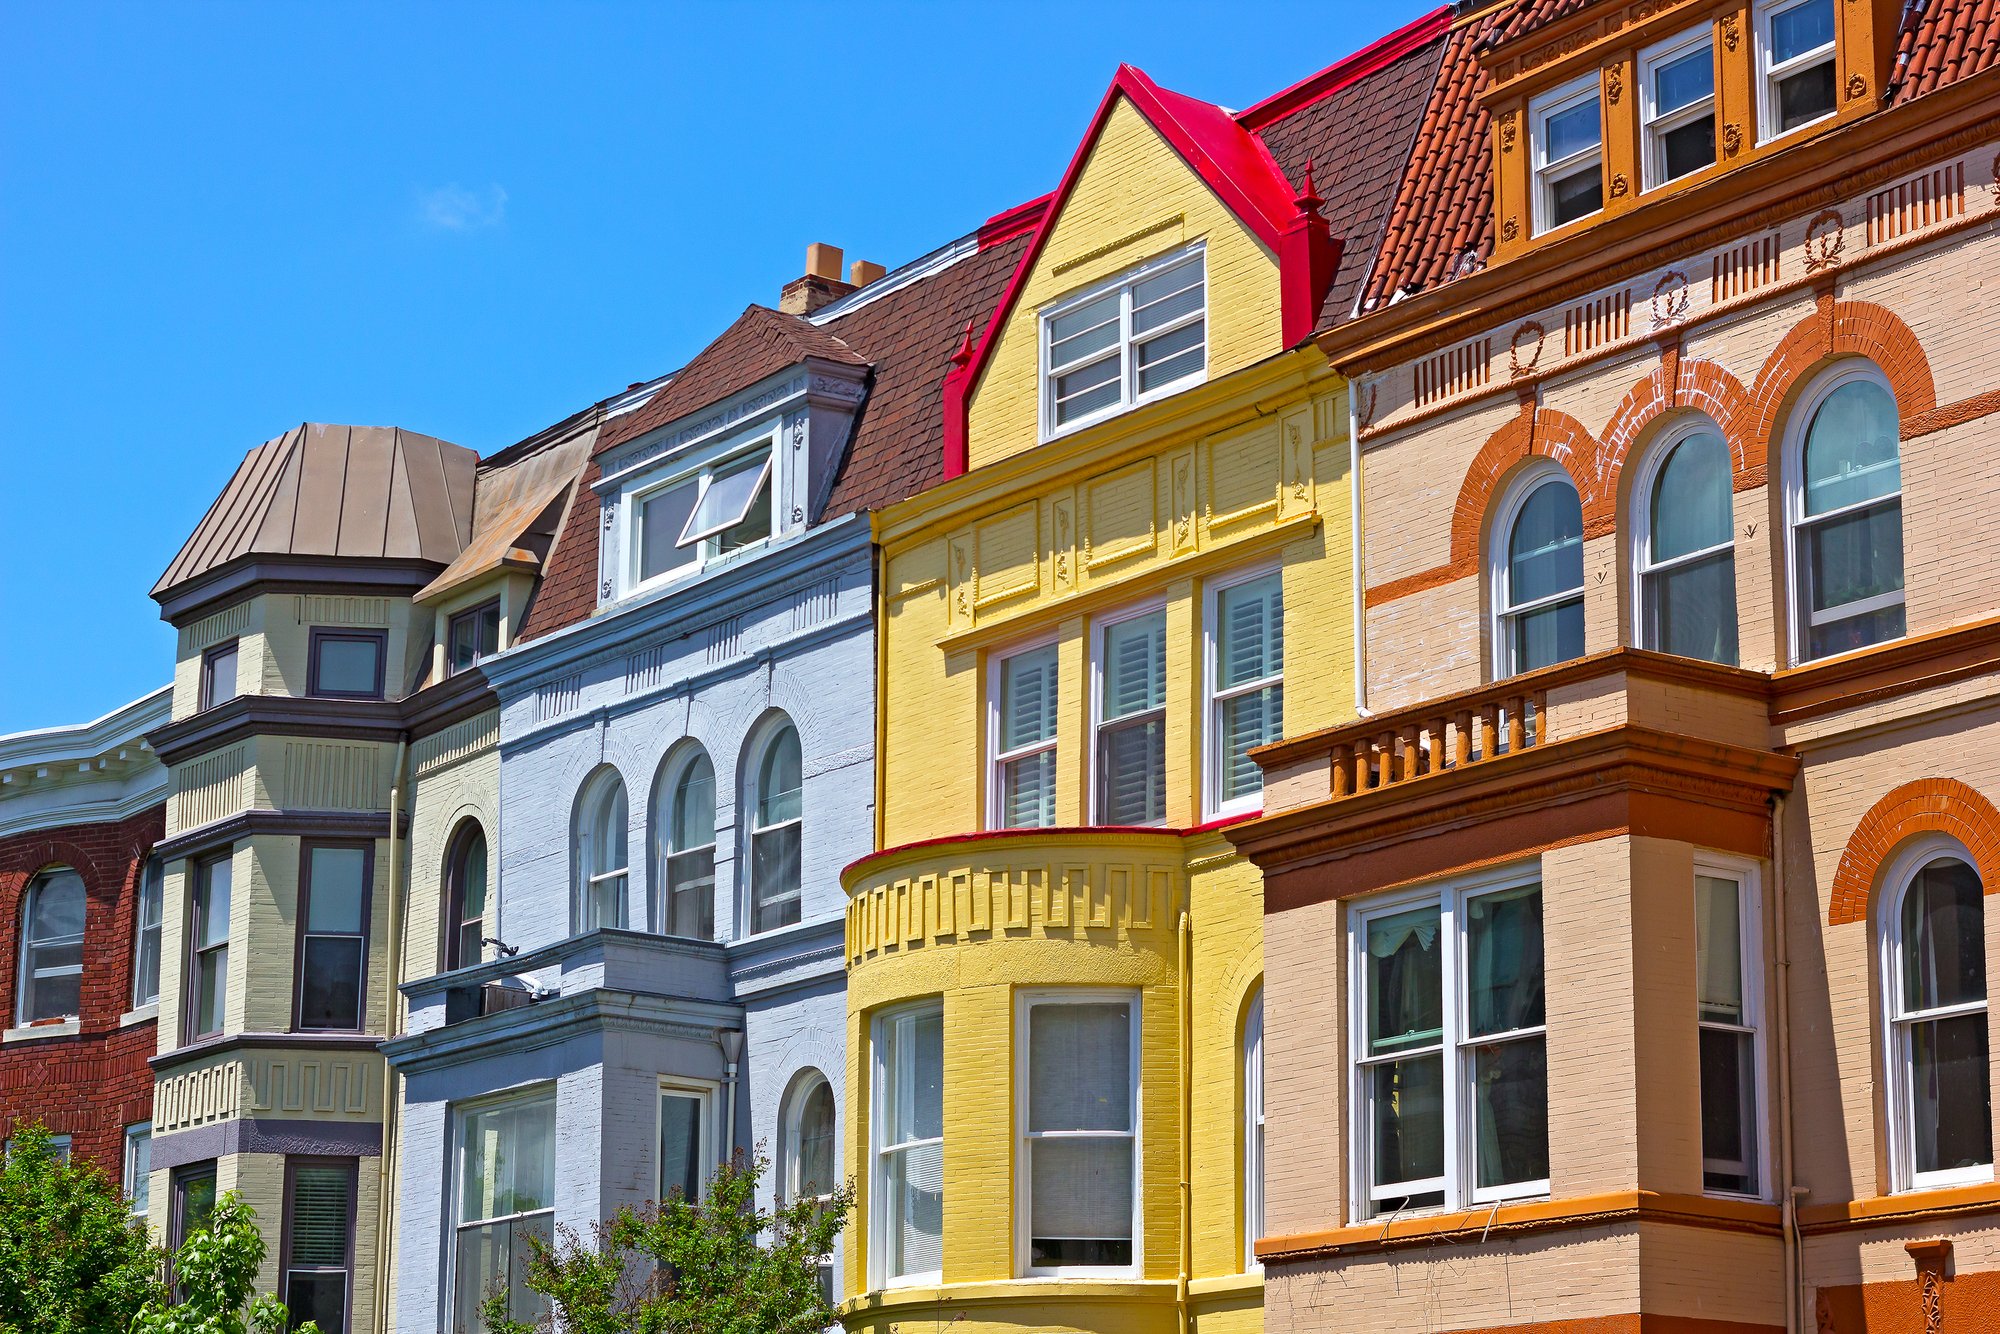 Row houses on a sunny spring day in Washington DC, USA